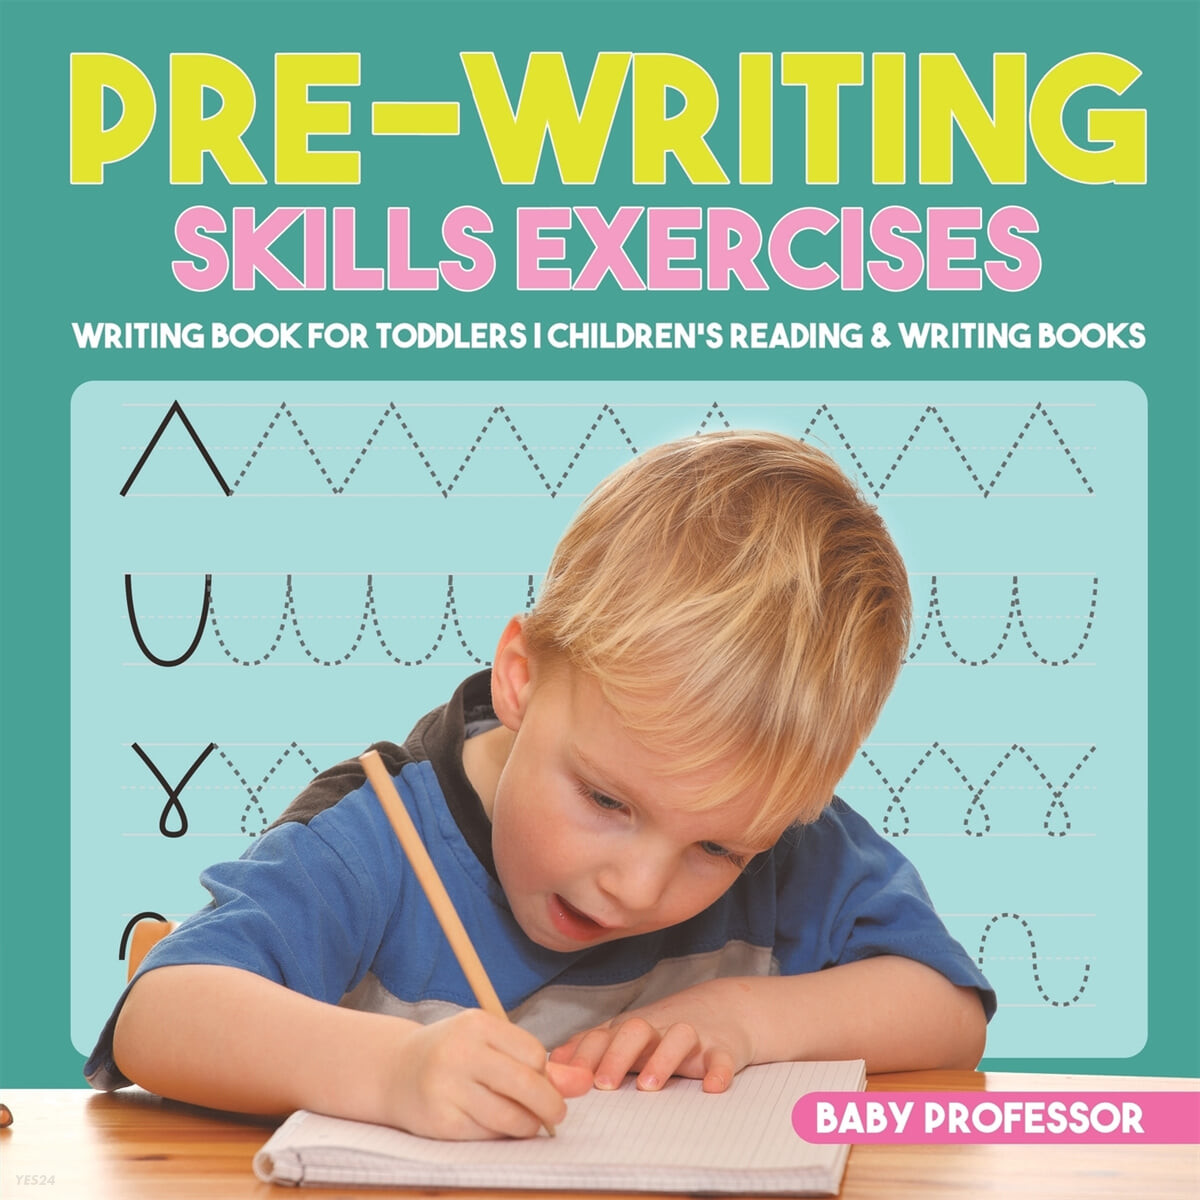 Pre-Writing Skills Exercises - Writing Book for Toddlers - Children’s Reading & Writing Books